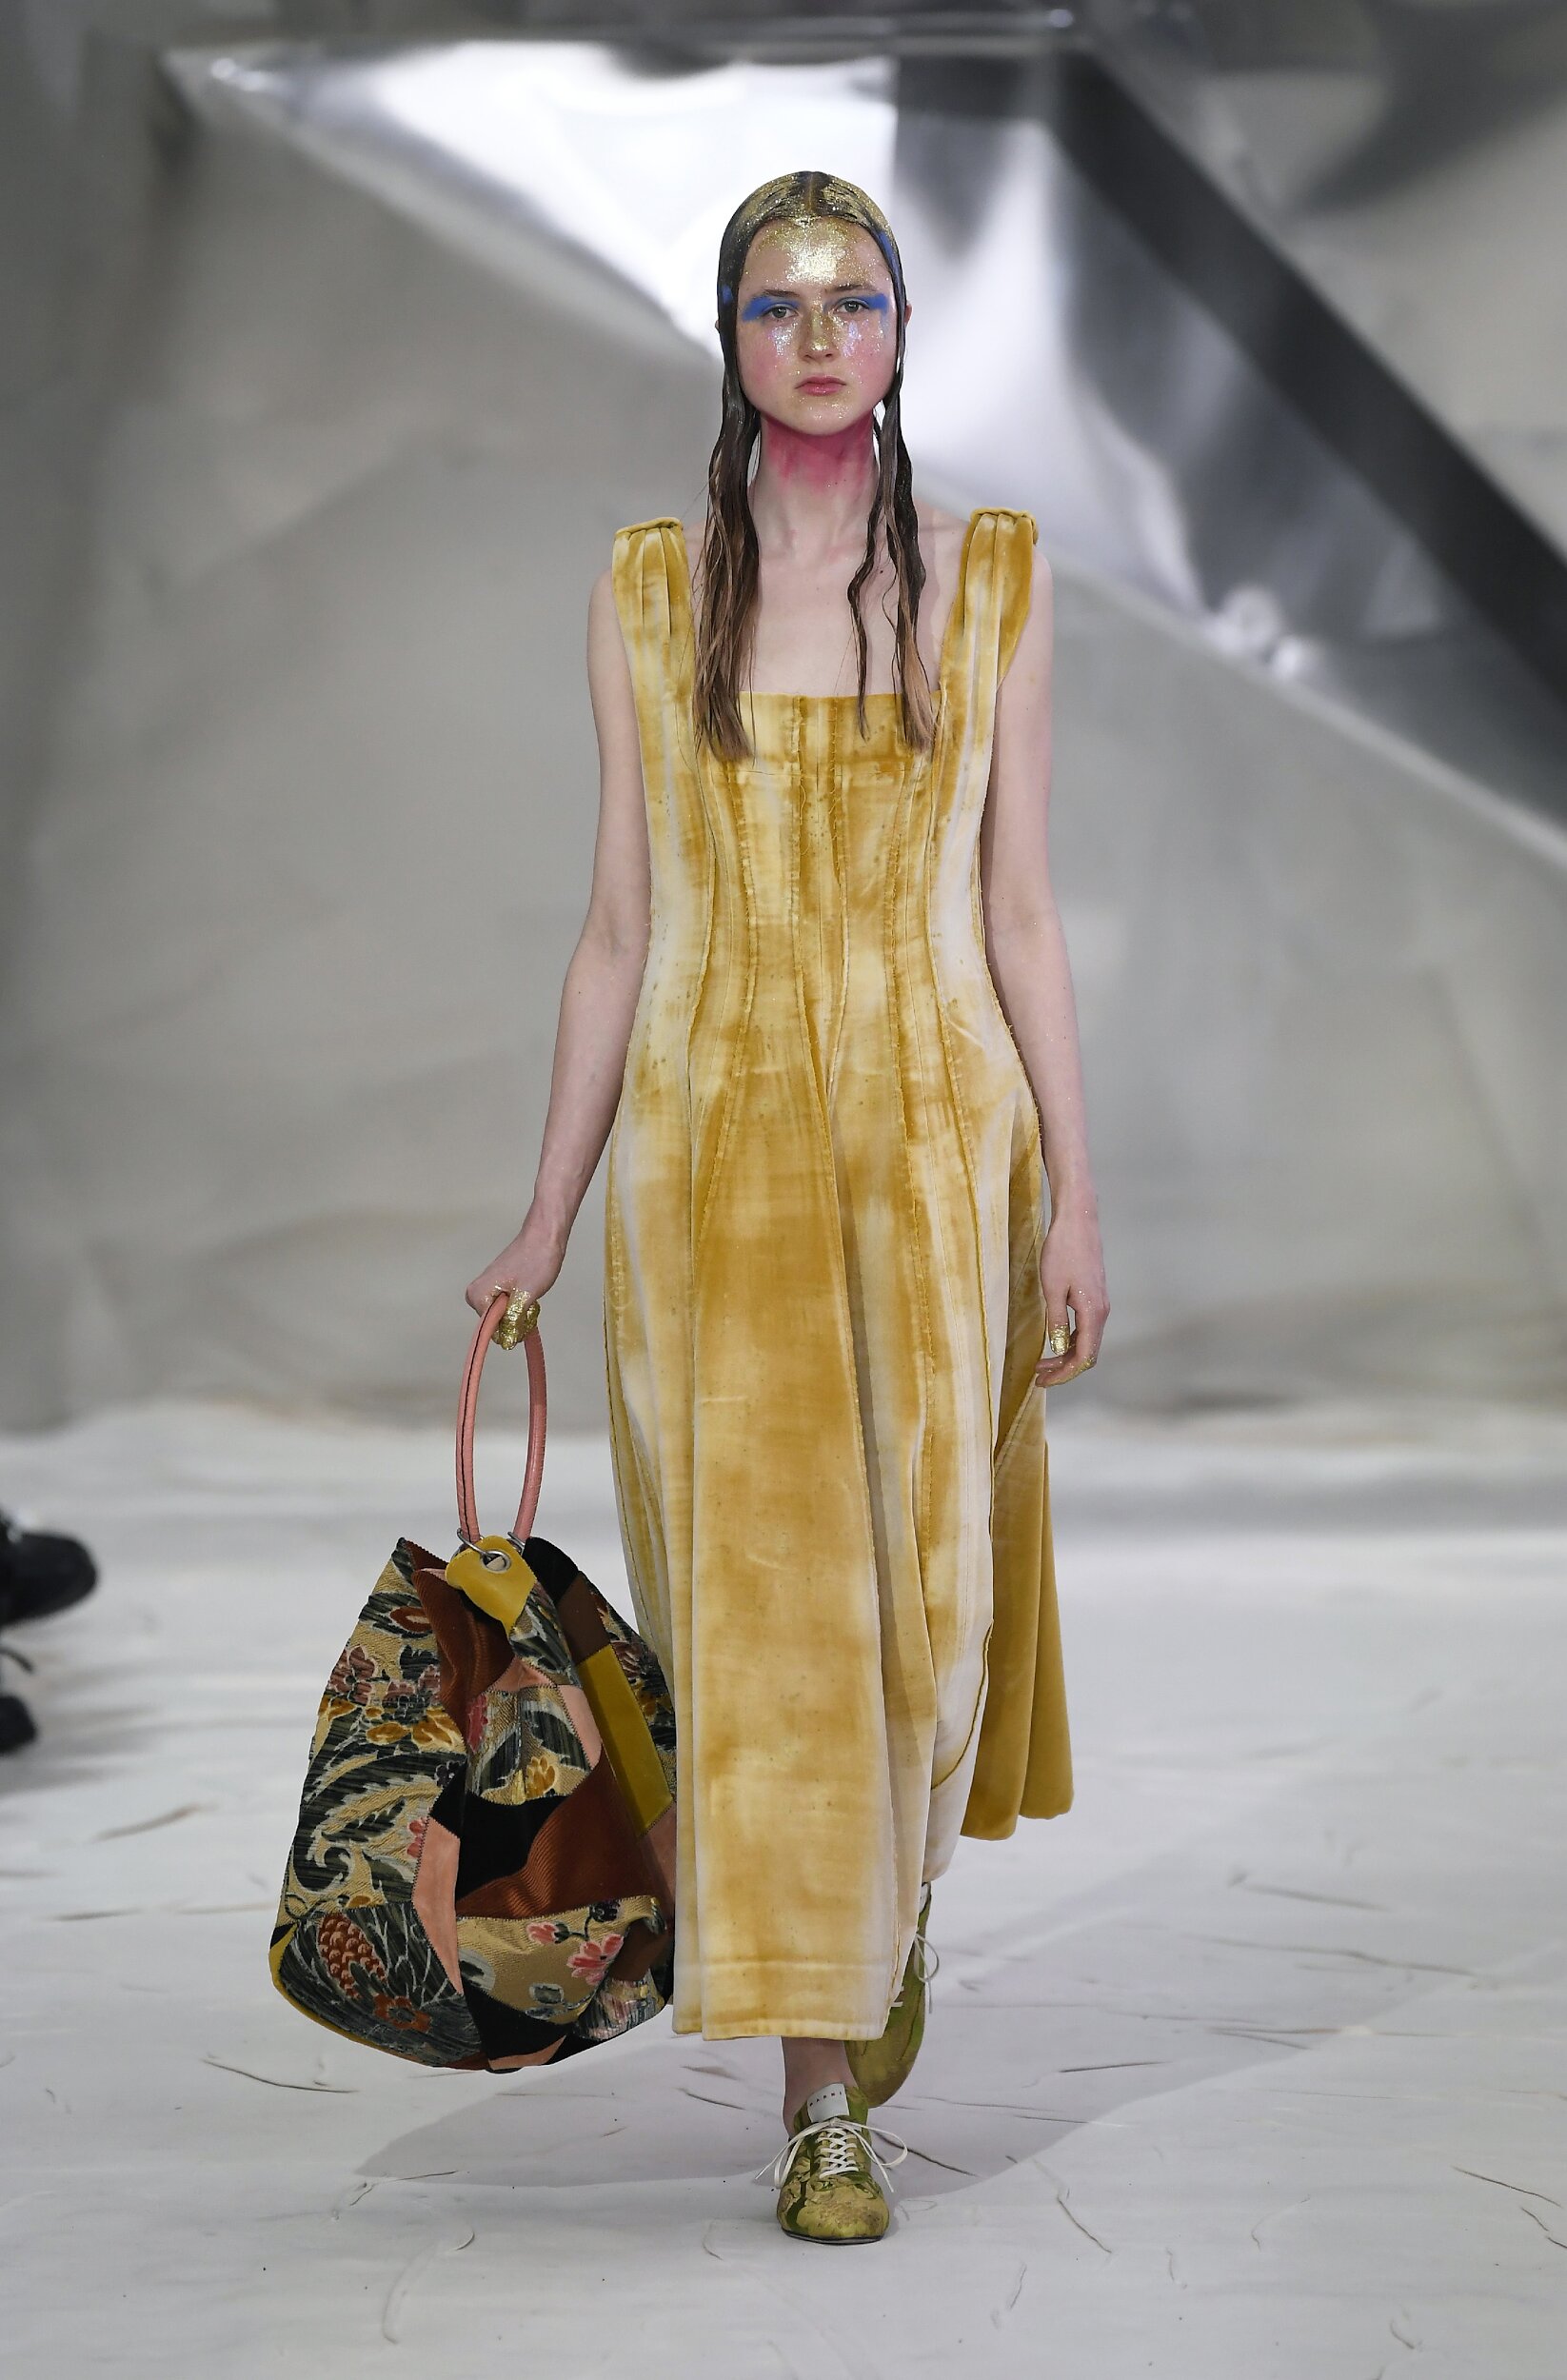 MARNI FALL WINTER 2020 WOMEN’S COLLECTION | The Skinny Beep